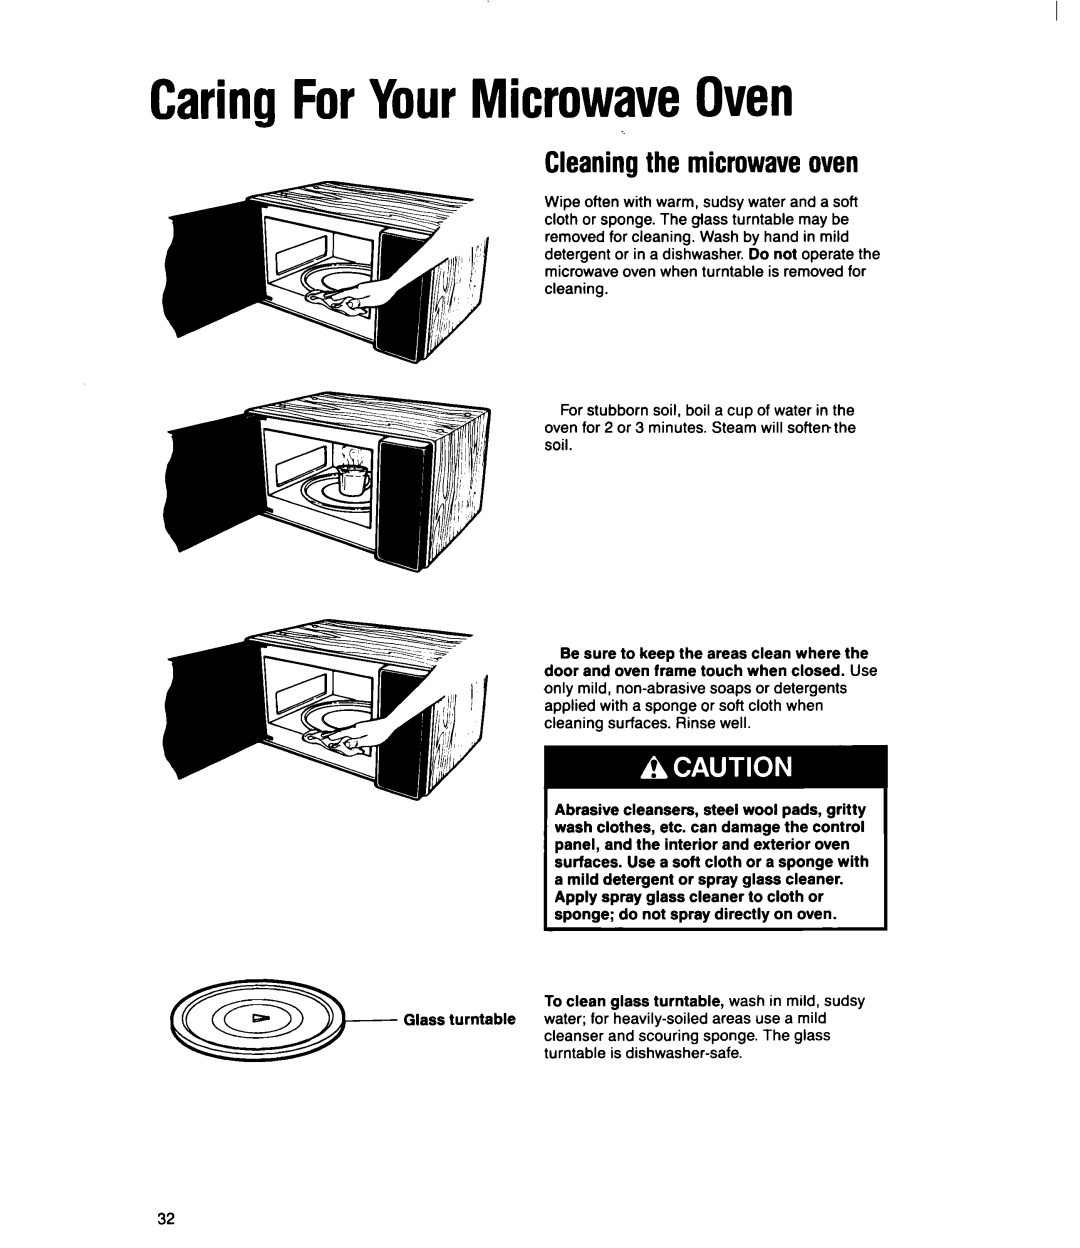 Whirlpool MT2100XY user manual Caring For Your Microwave Oven, Cleaning the microwaveoven 